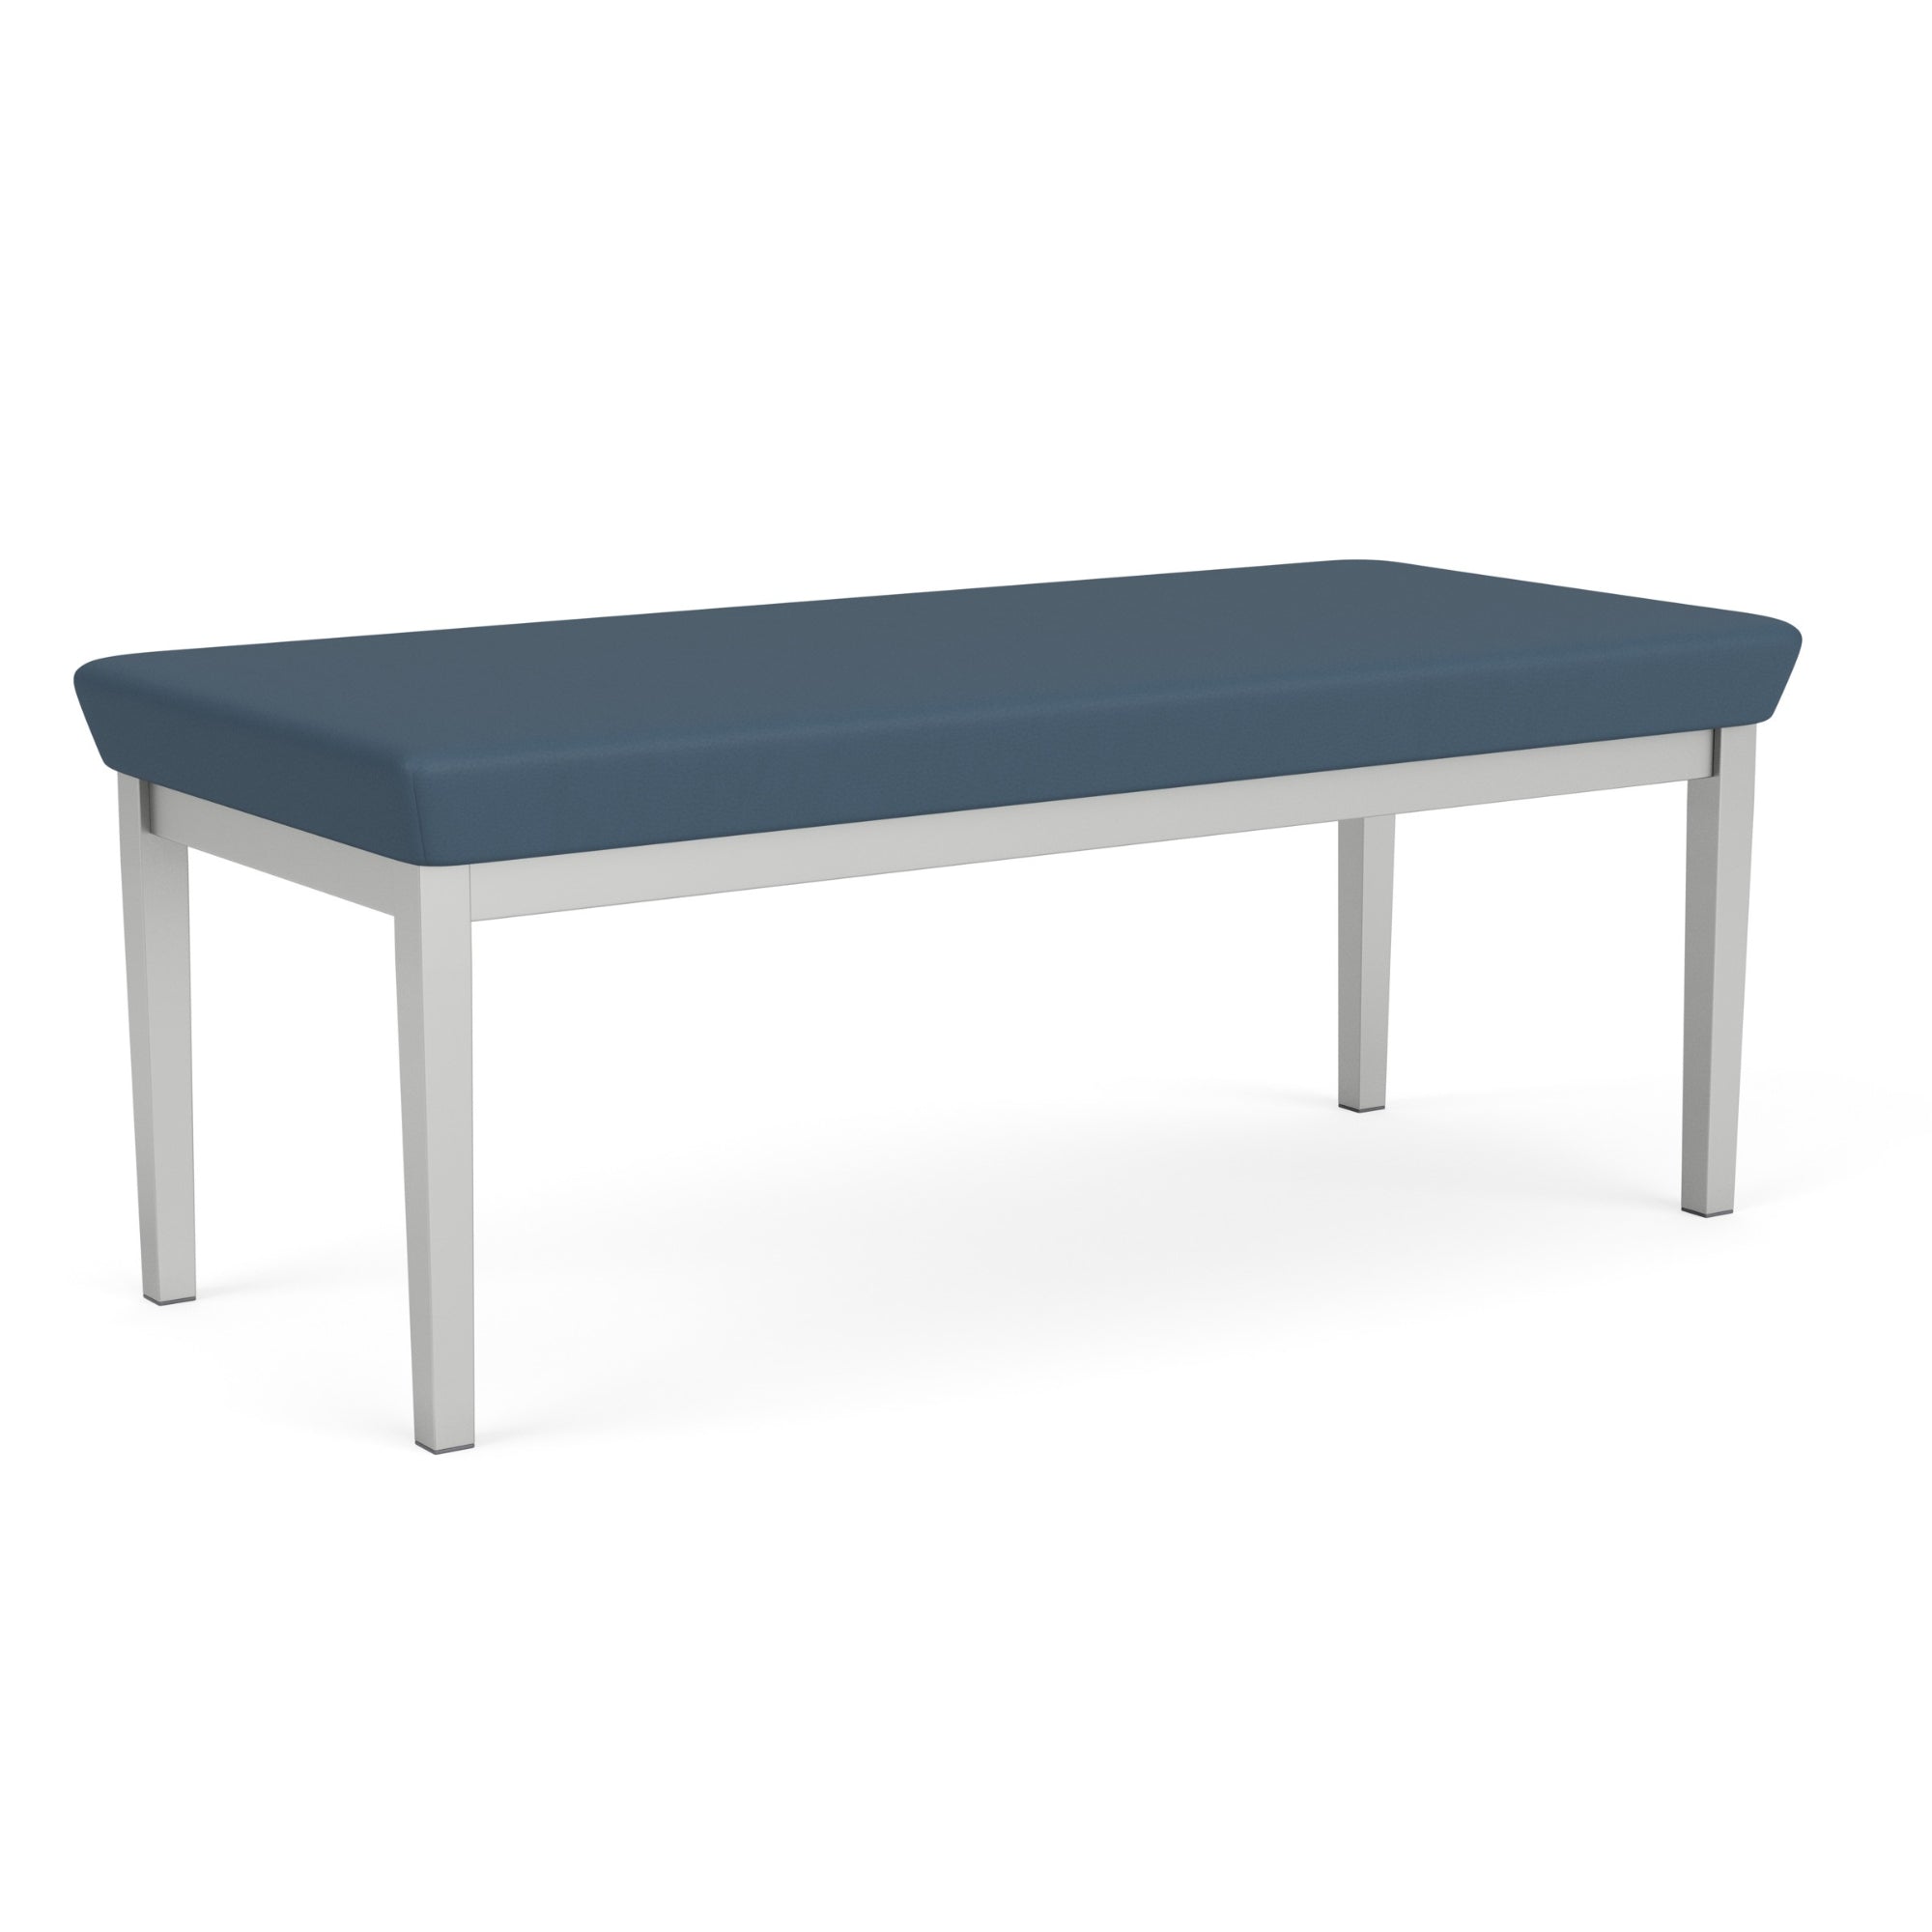 Lenox Steel Collection Reception Seating, 2 Seat Bench, Standard Vinyl Upholstery, FREE SHIPPING